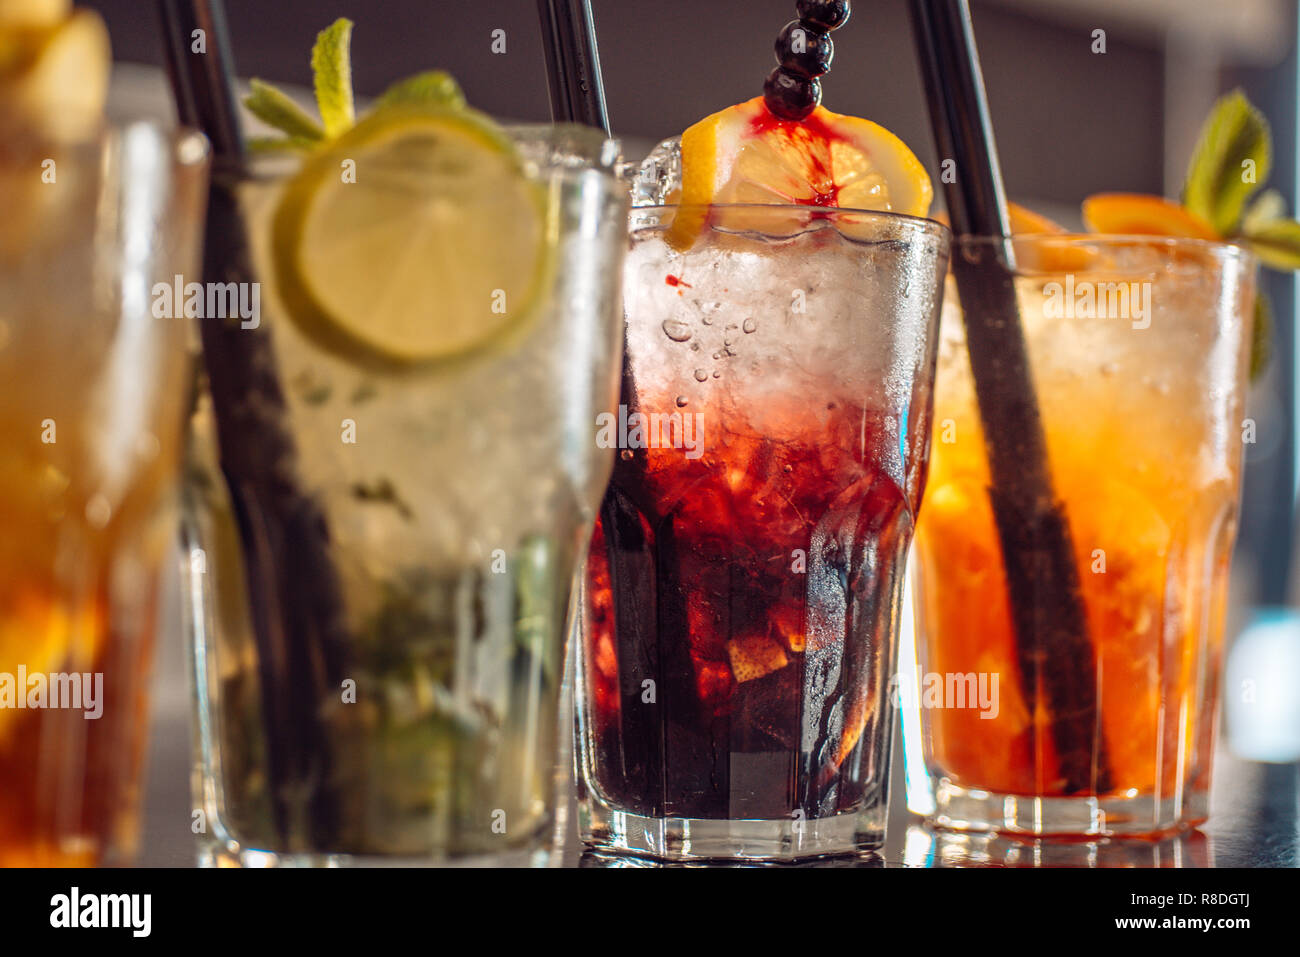 https://c8.alamy.com/comp/R8DGTJ/drink-here-cocktail-drinks-served-in-glasses-with-drinking-straws-alcoholic-mixed-drinks-with-ice-iced-drinks-in-cocktail-glasses-in-bar-juicy-beverages-with-alcohol-on-counter-alcohol-addiction-R8DGTJ.jpg